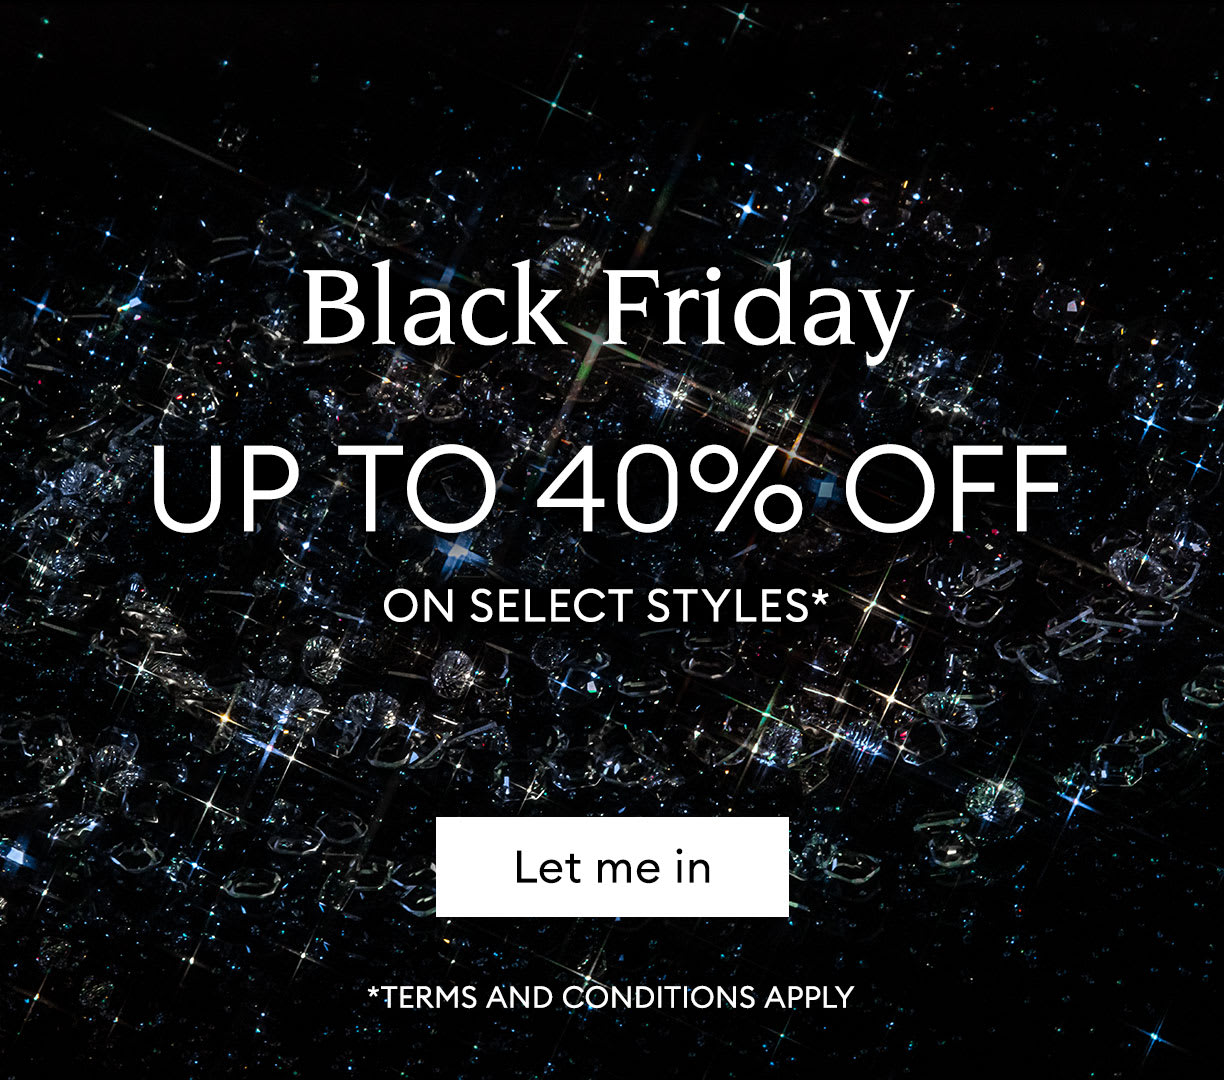 Black Friday up to 40% off on selected styles*